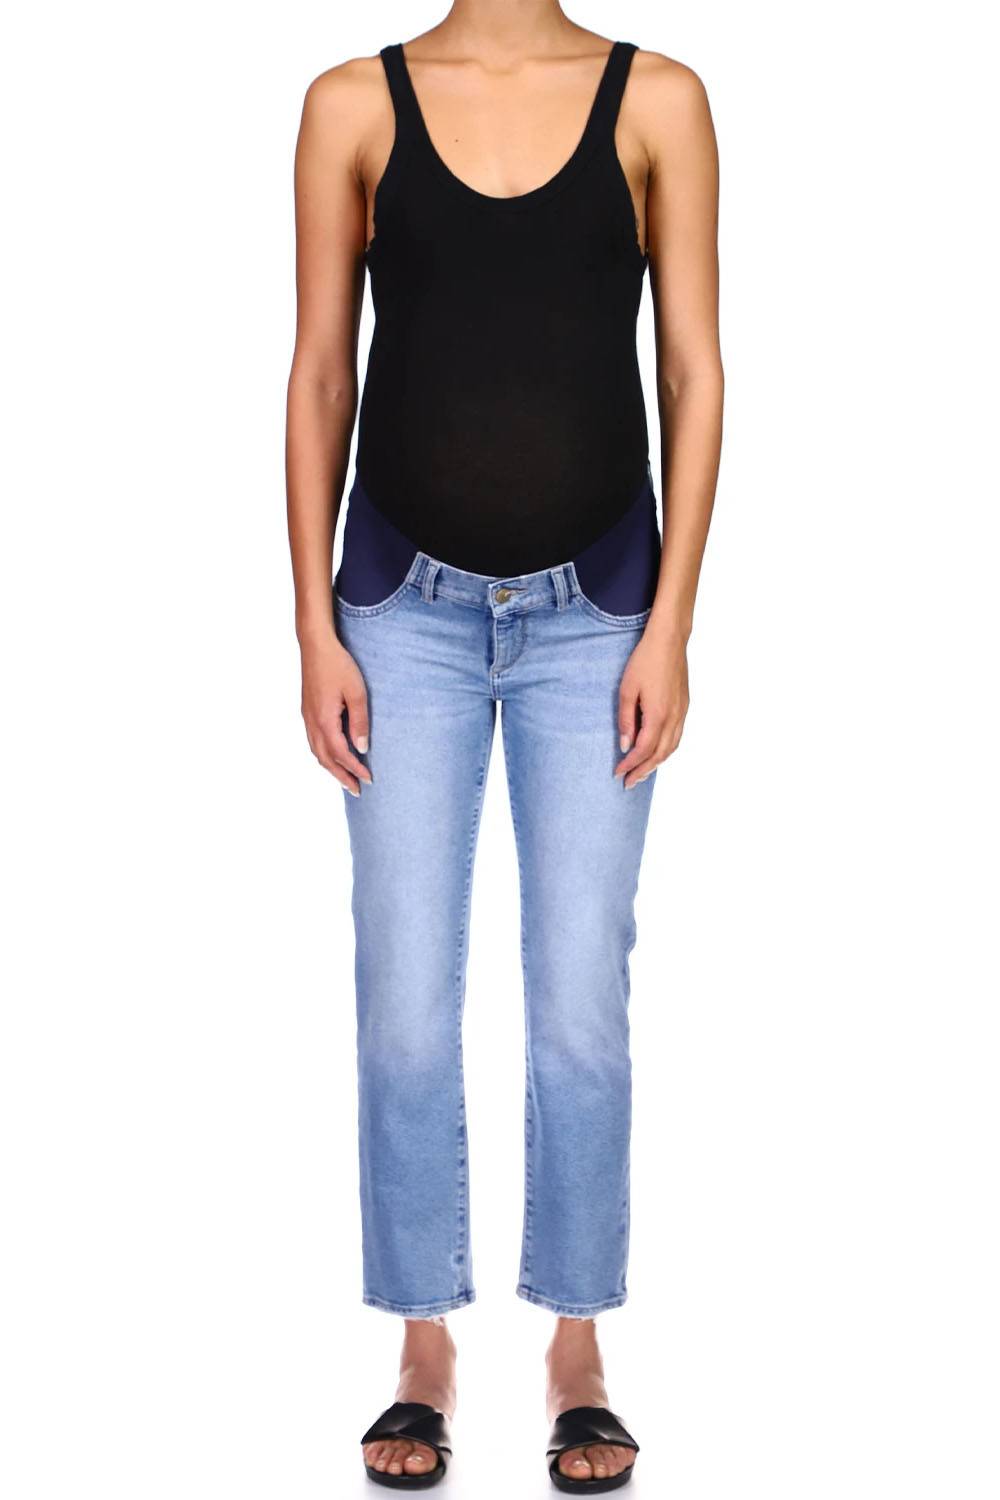 dl1961 eco-friendly maternity jeans